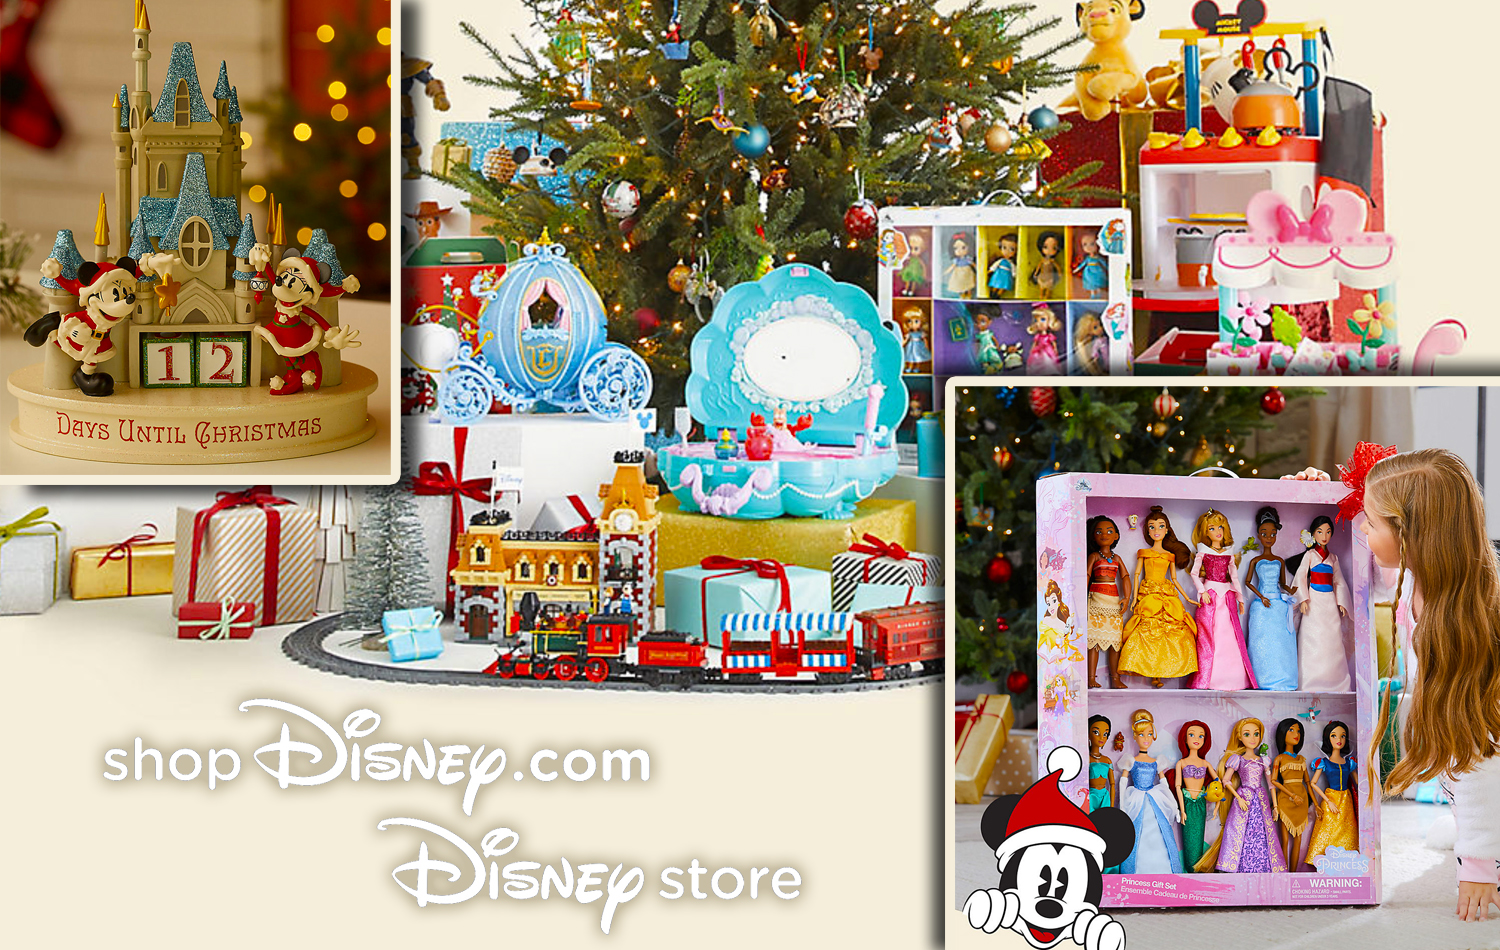 shopDisney.com and Disney store Reveal the Top Holiday Toys for the 2019 Holiday Season